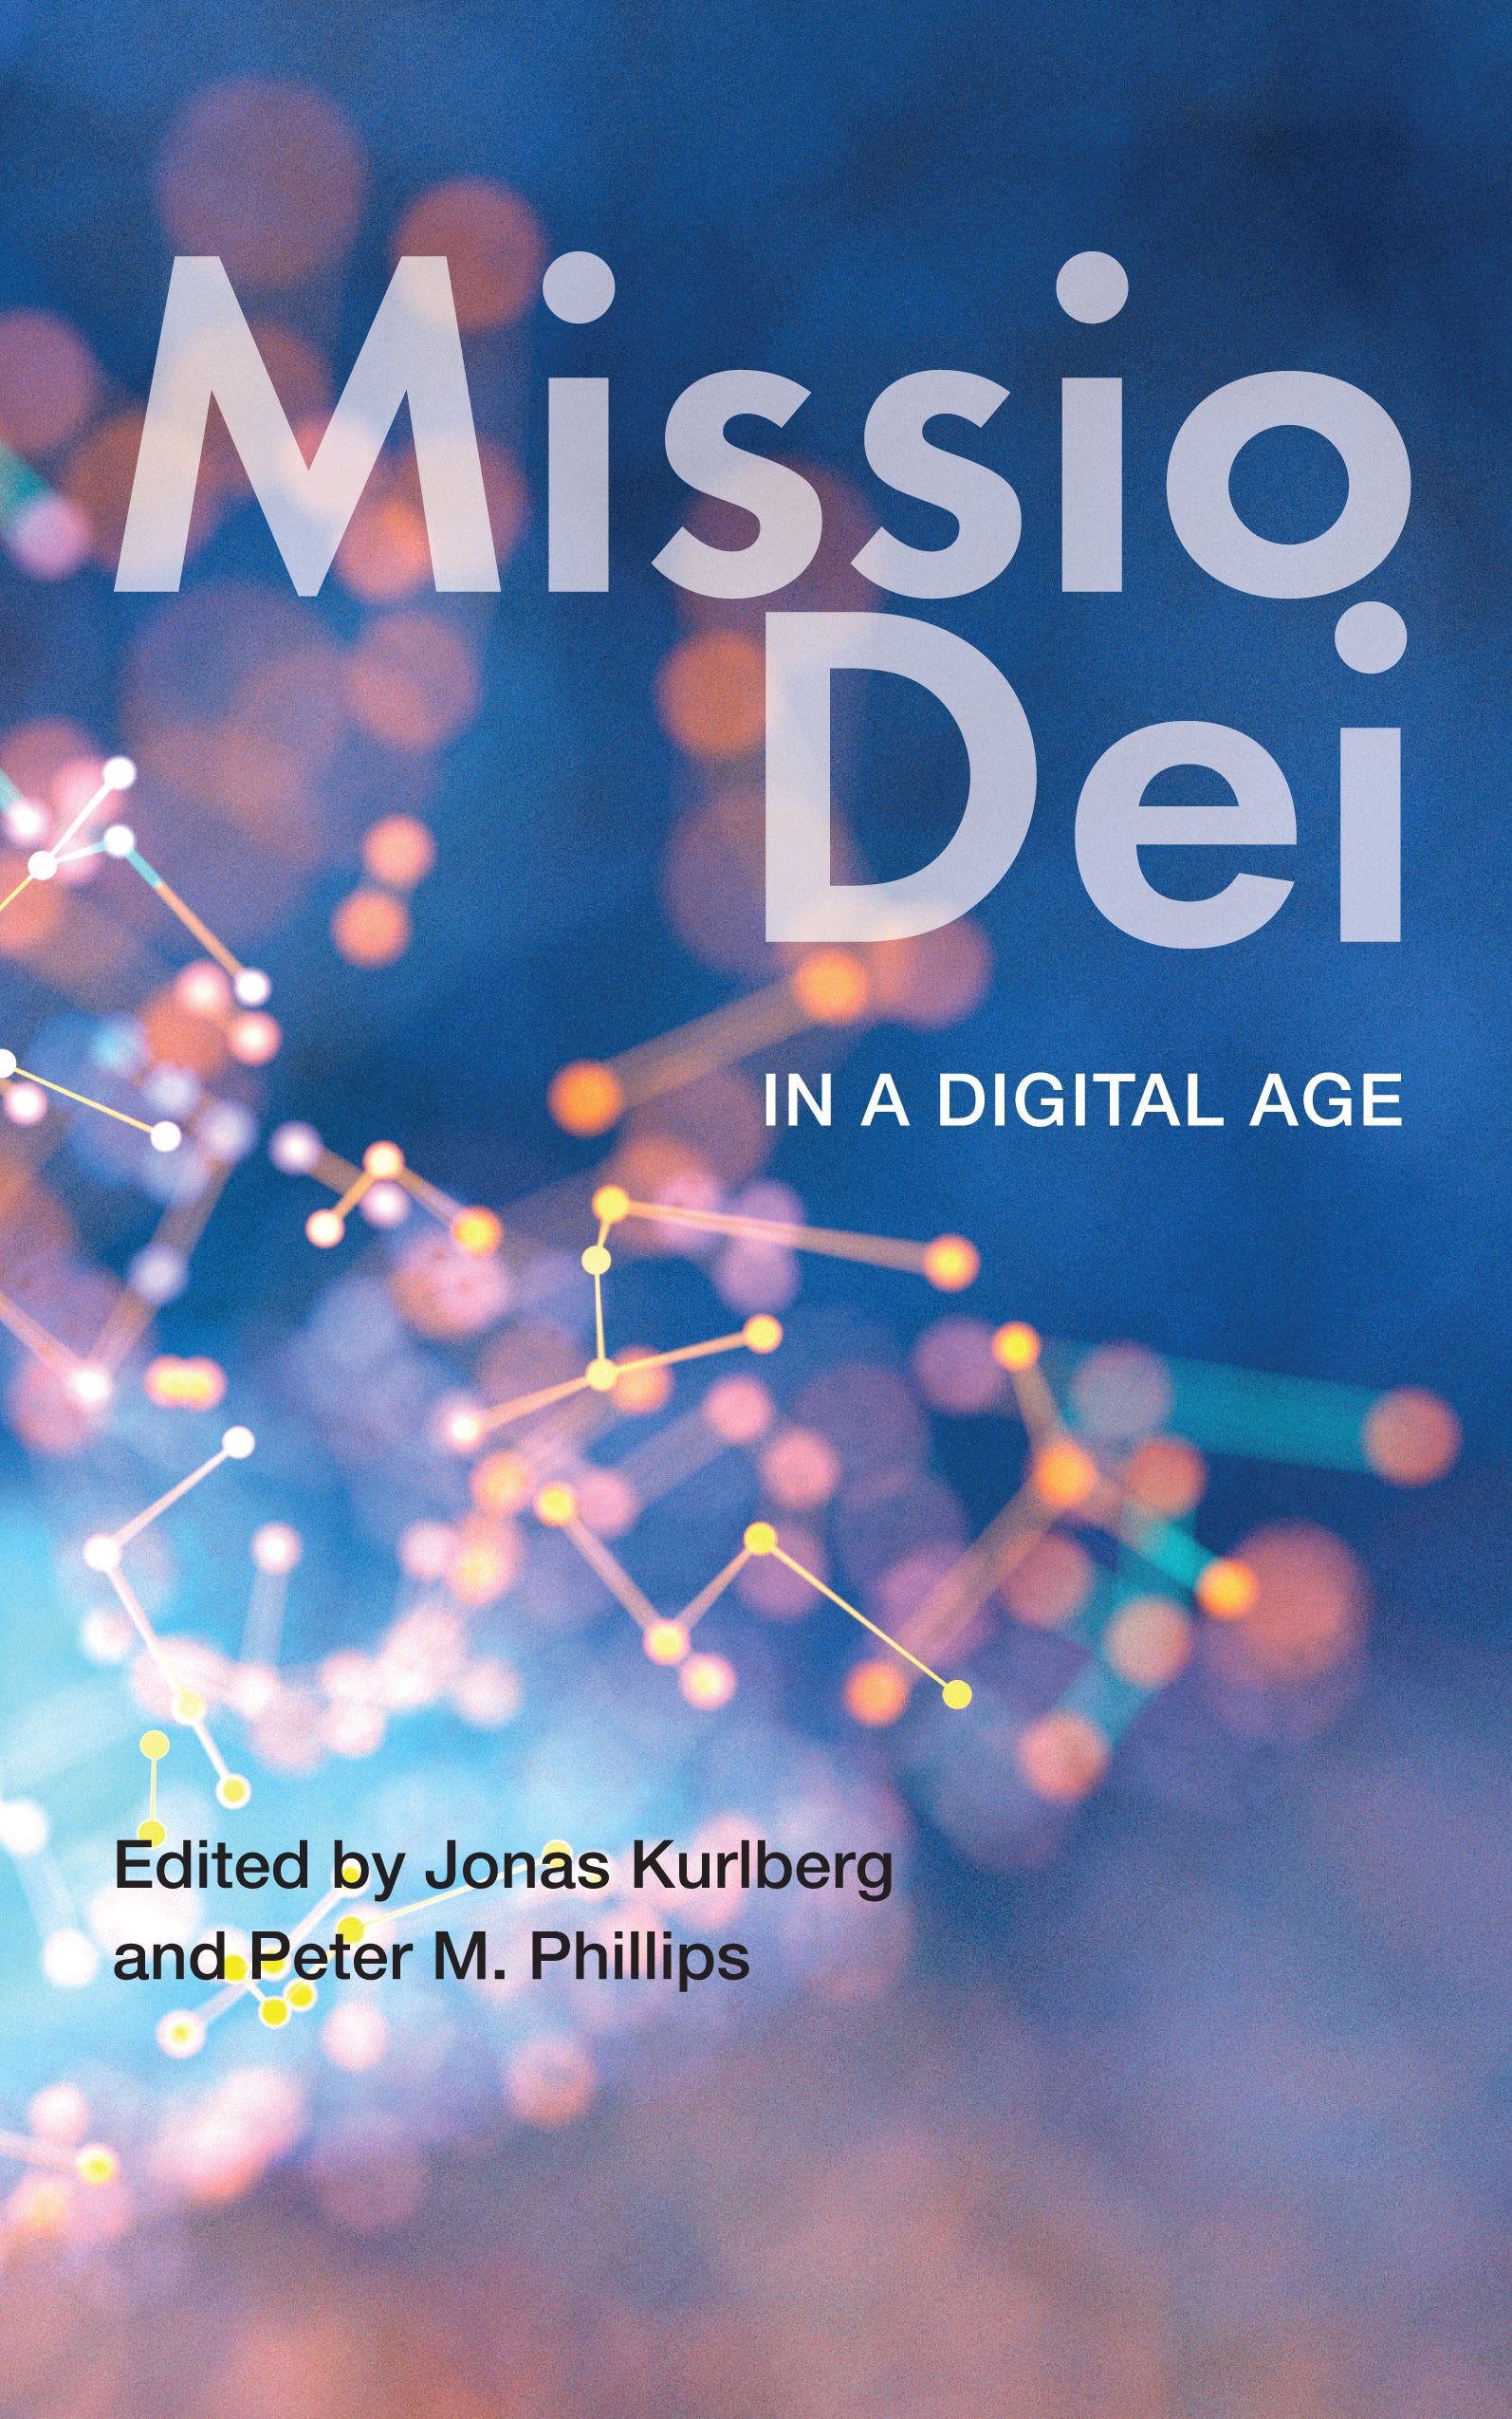 Image of Missio Dei in a Digital Age other